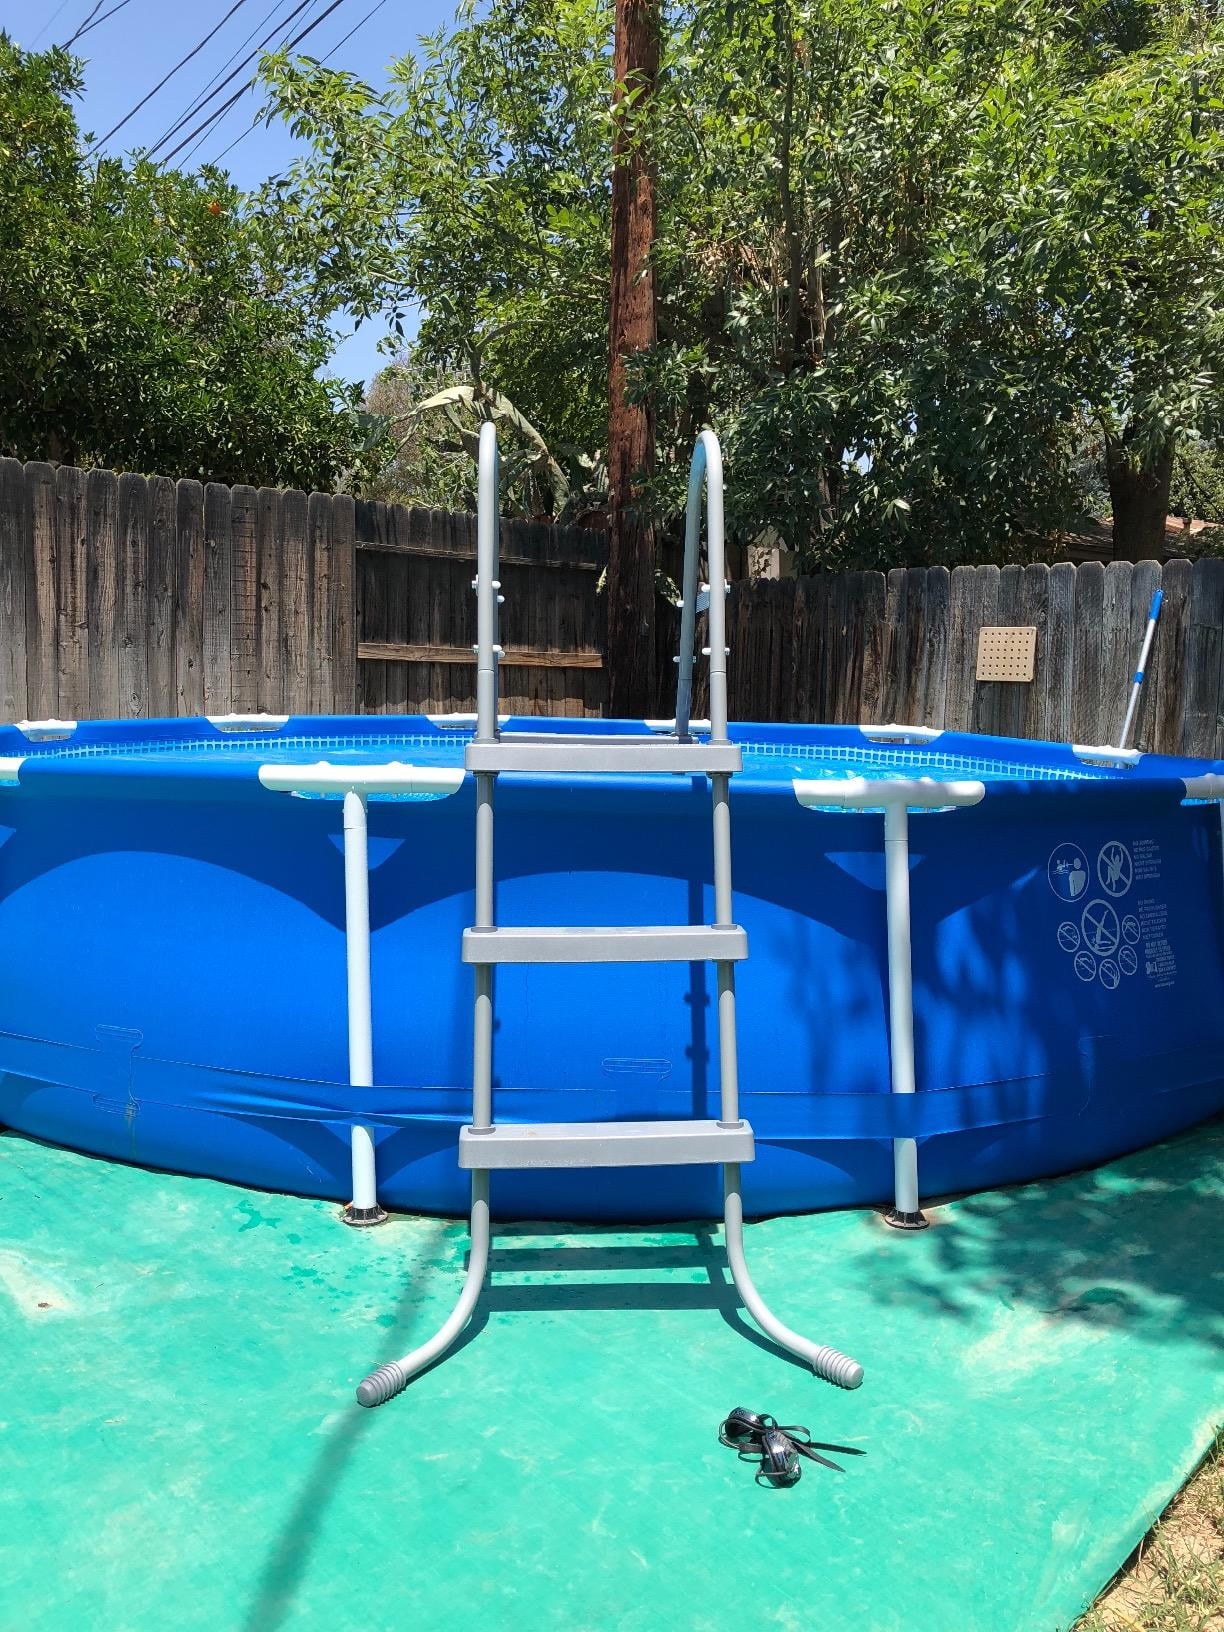 36 Inch Pool Ladder with Removable Steps Intex 